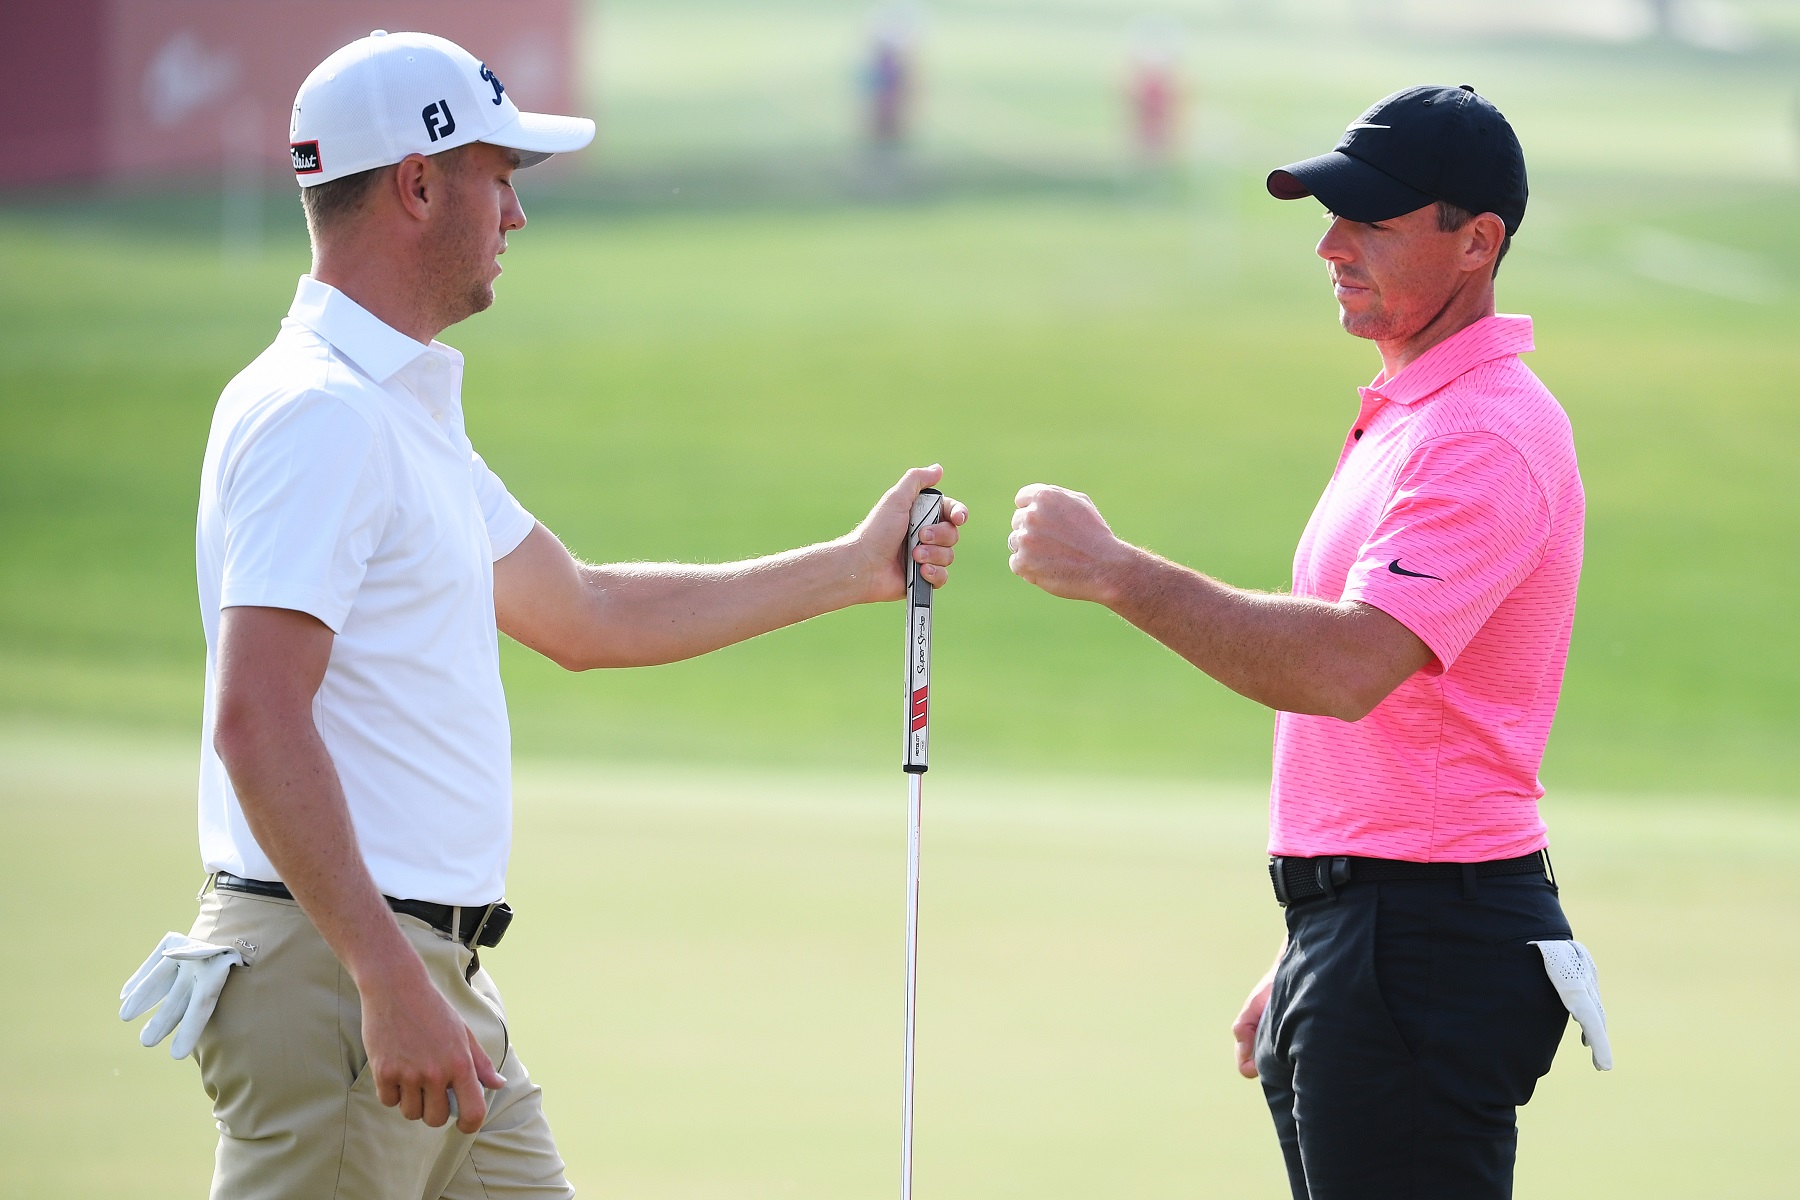 Justin Thomas Is Still 'a Great Guy' Despite the Homophobic Slur, PGA Rival Rory McIlroy Insists